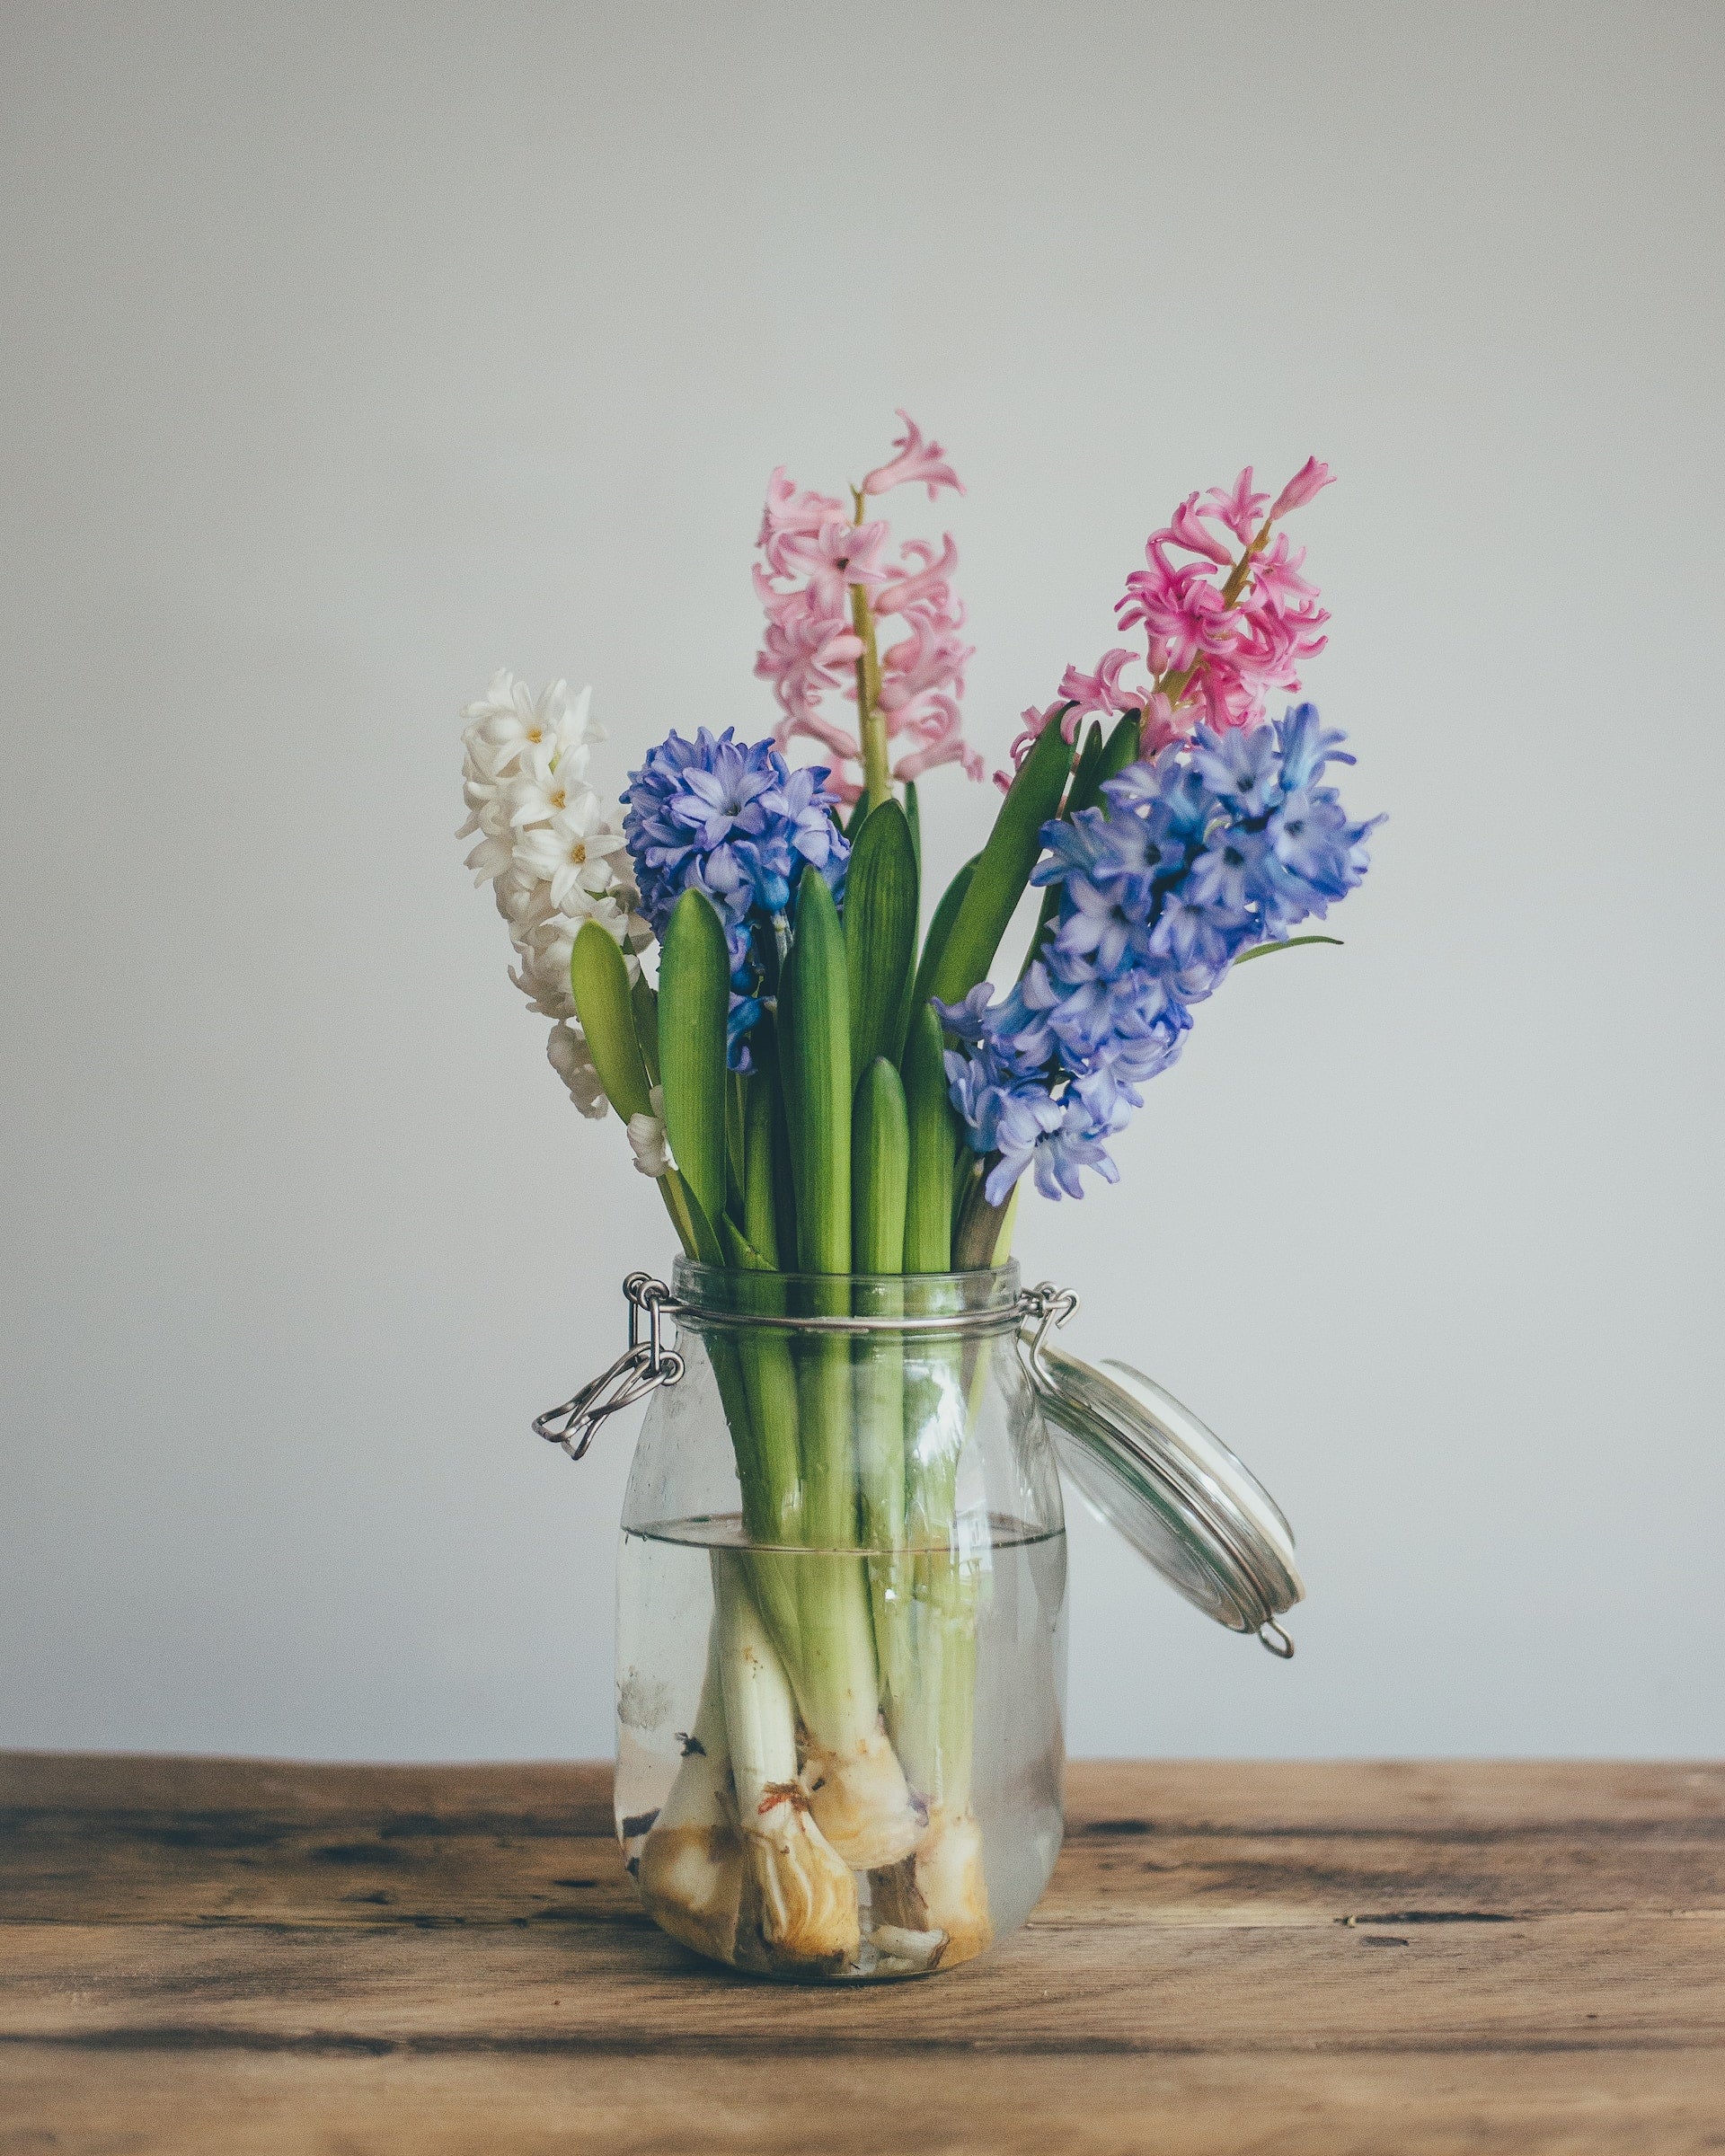 A selection of Spring blooms in an open kilner jar, on top of a wooden table.